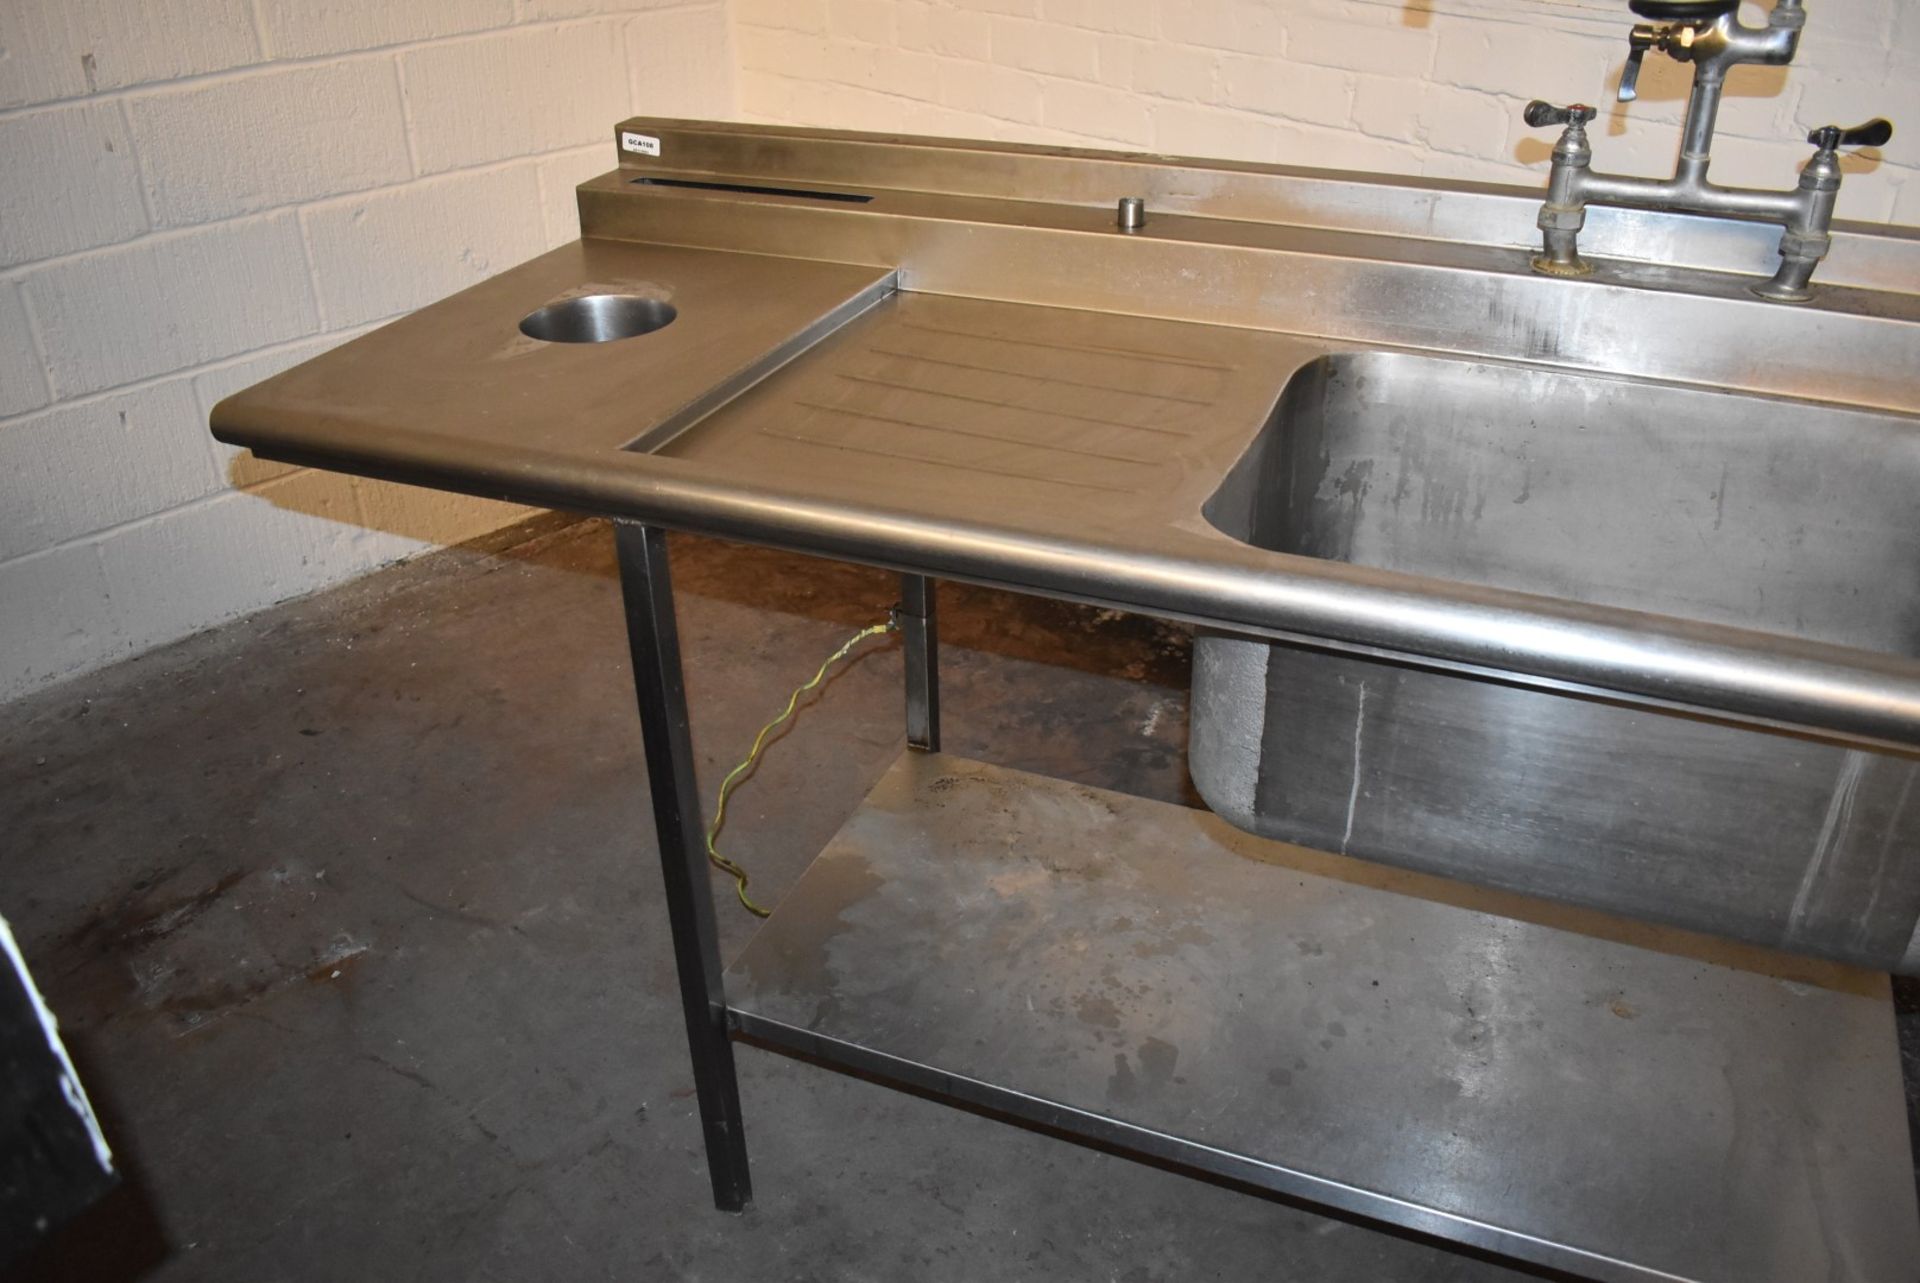 1 x Stainless Steel Single Bowl Sink Unit With Mixer Taps, Spray Hose Tap, Drainer and Bin Chute - Image 6 of 10